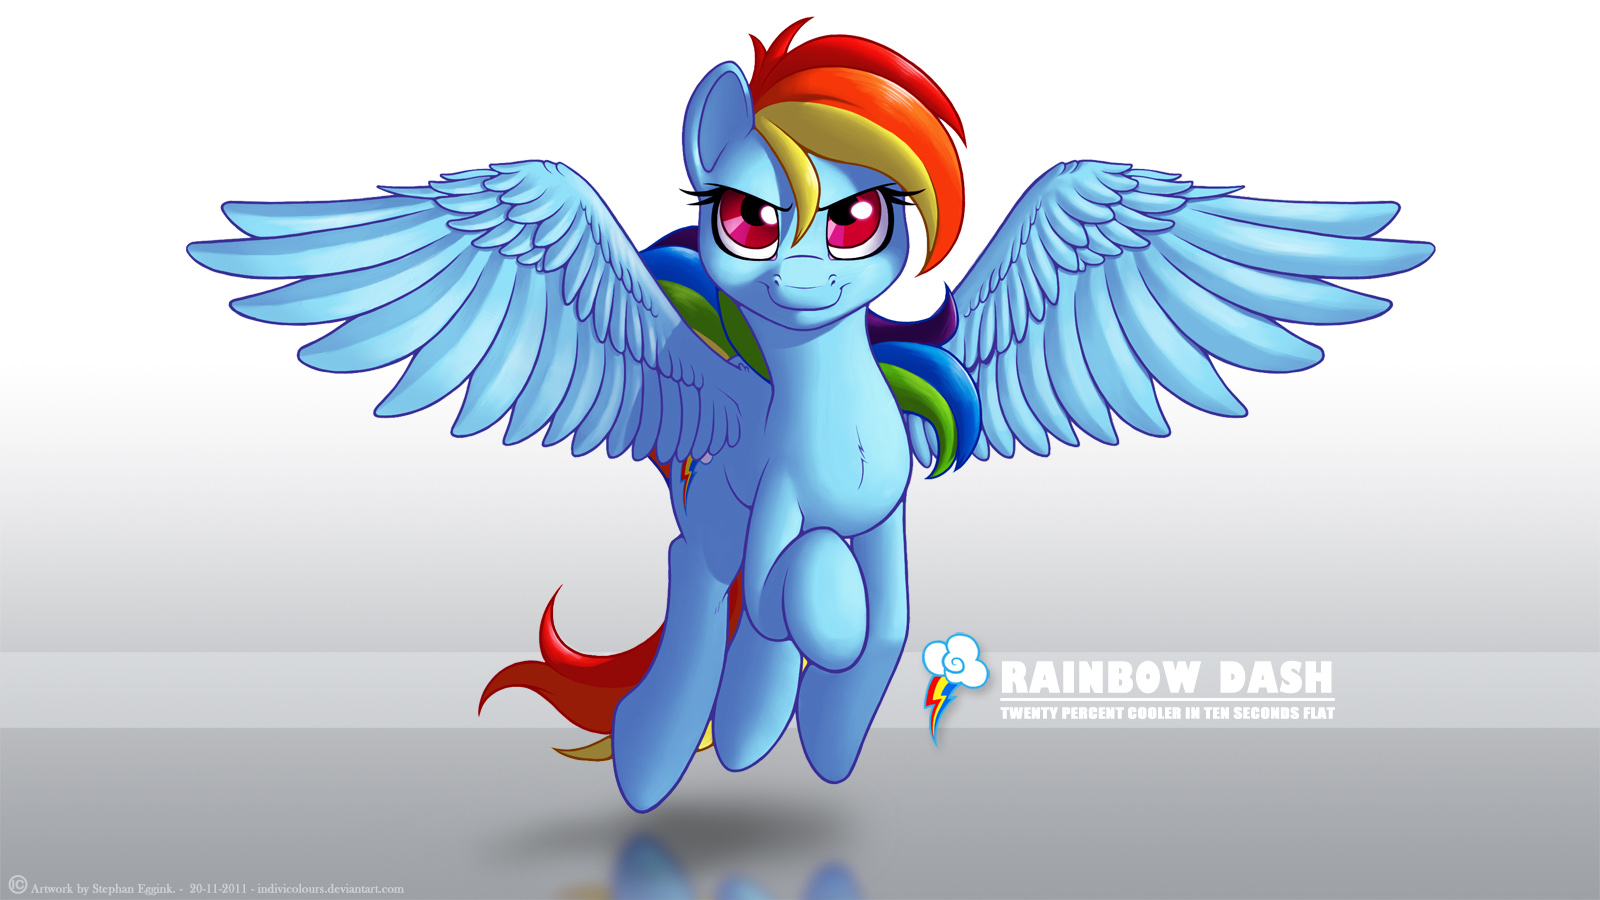 Wallpaper - Rainbow Dash by Indivicolours